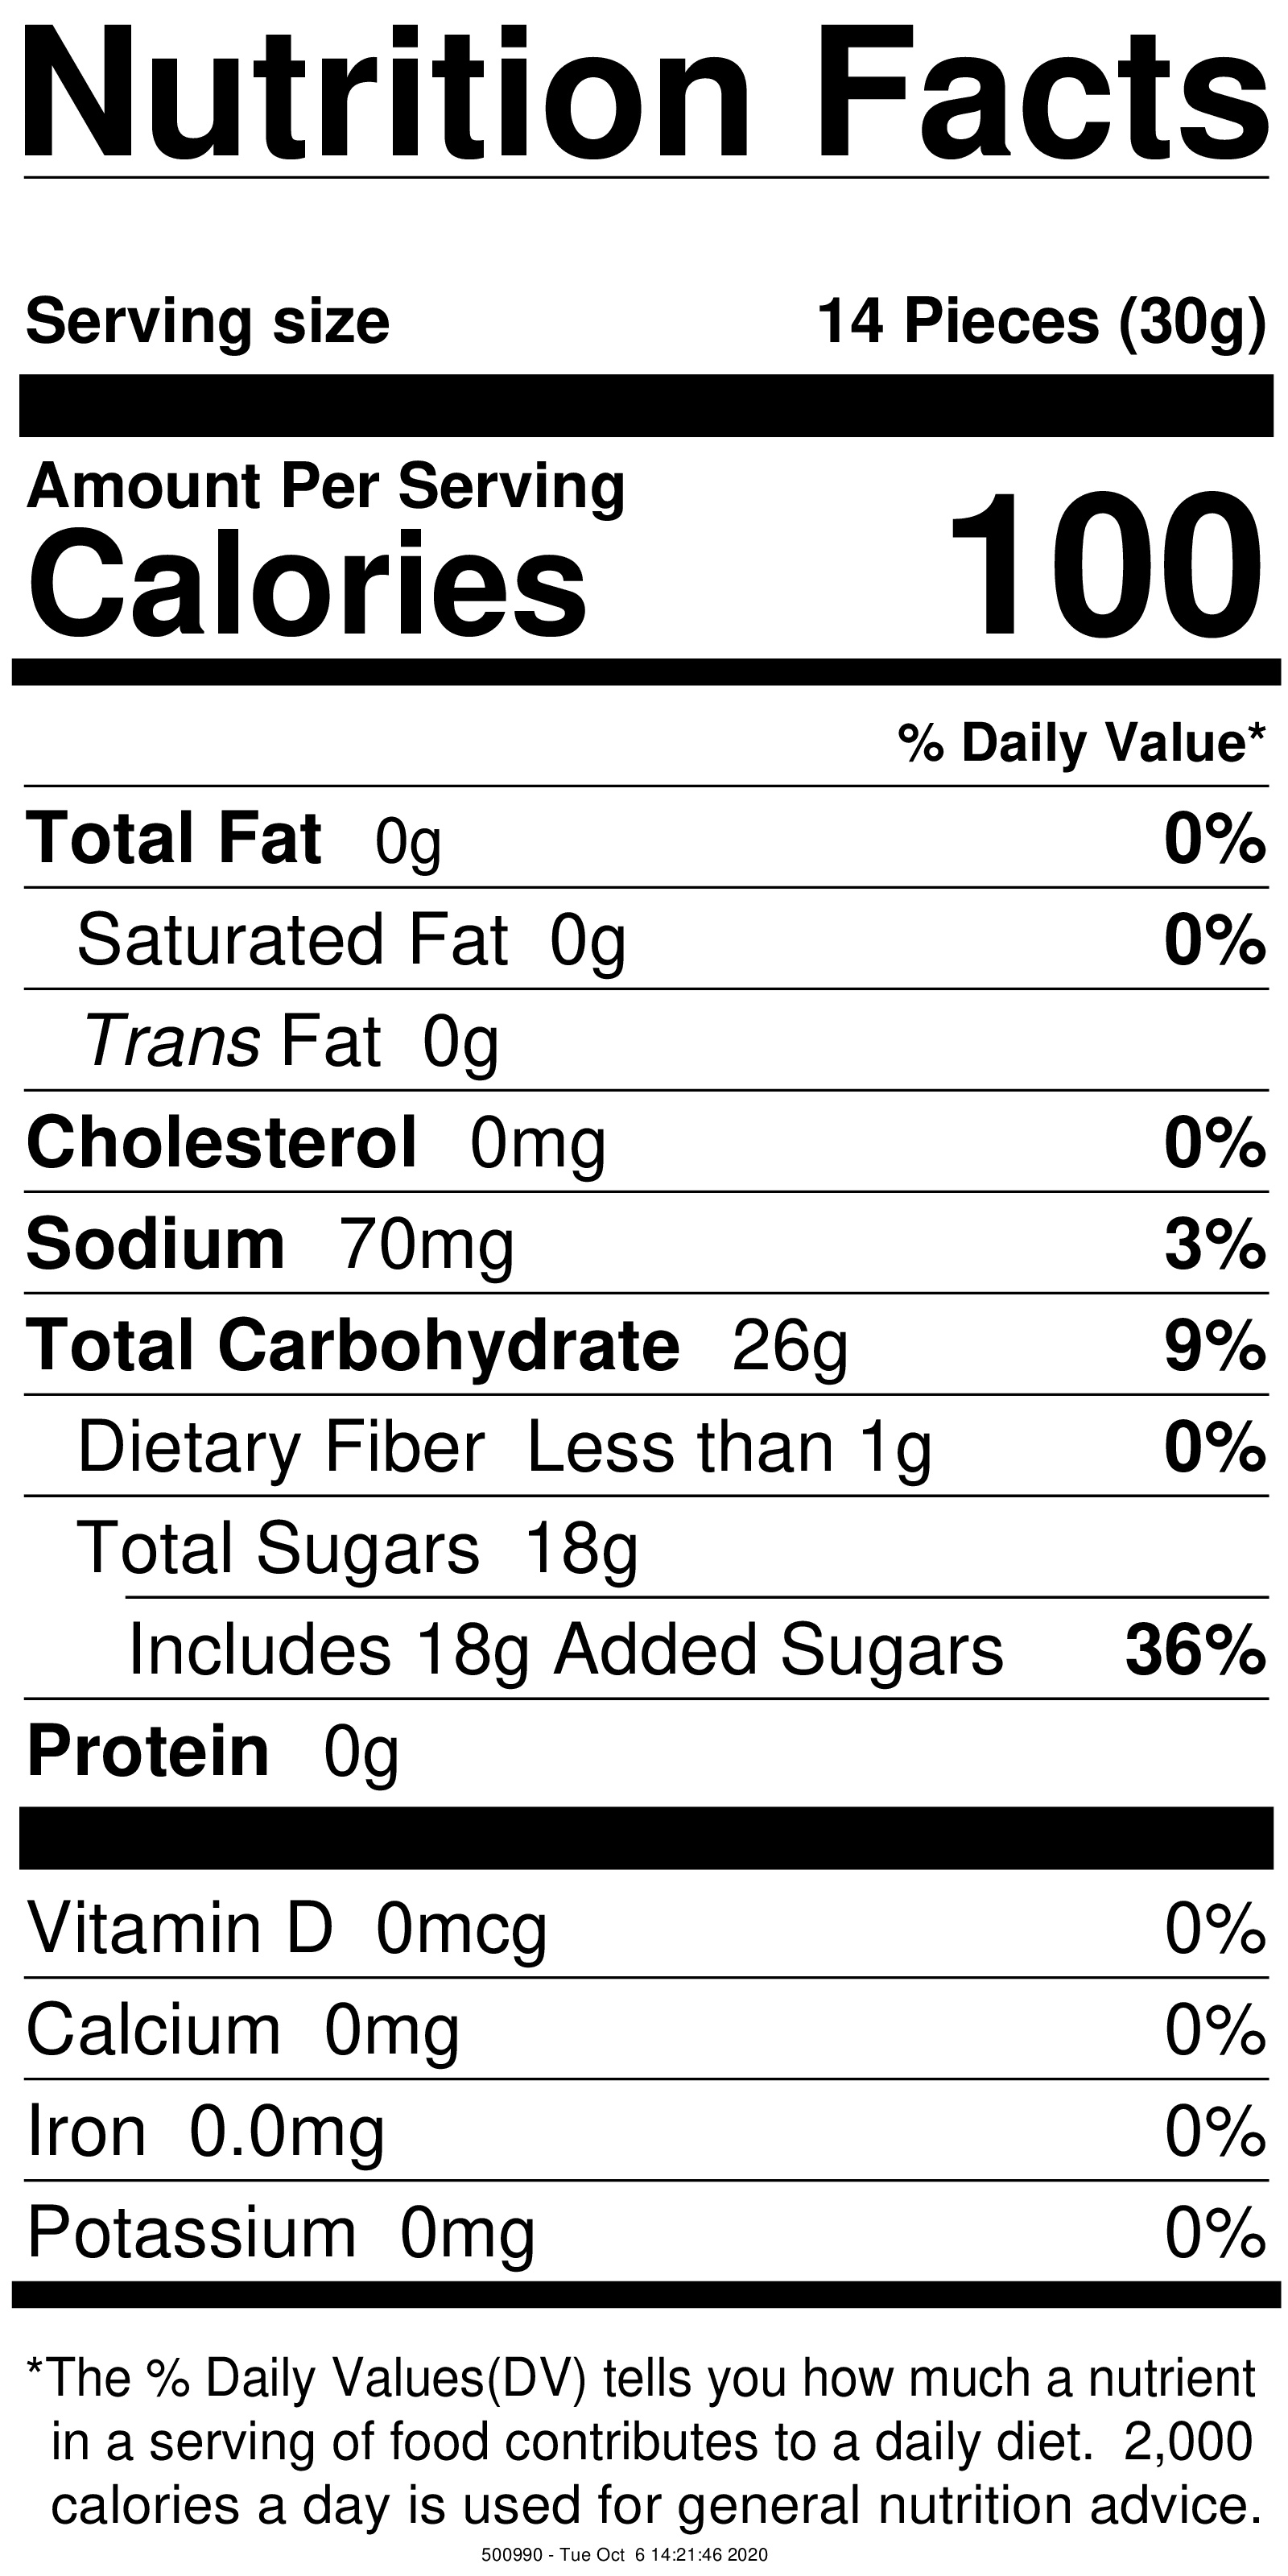 Gummy Bears Nutritional Facts Before The Addition of Delta 8 THC.